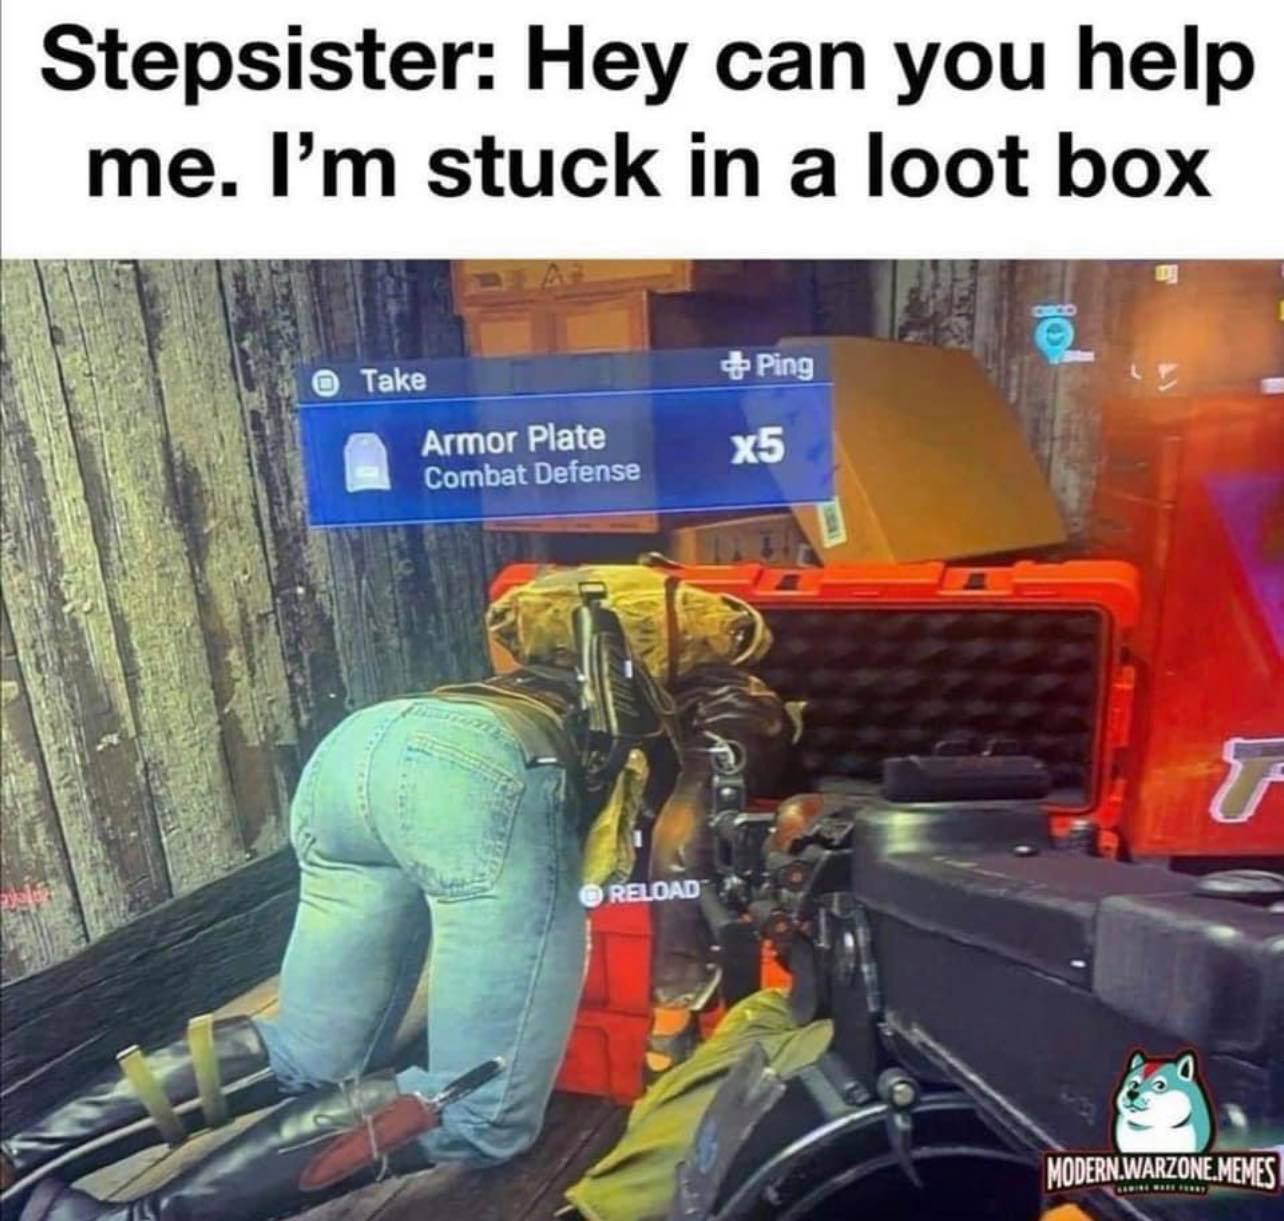 warzone memes 2021 - Stepsister Hey can you help me. I'm stuck in a loot box Ping Take Armor Plate Combat Defense x5 E Reload Modern.Warzone.Memes